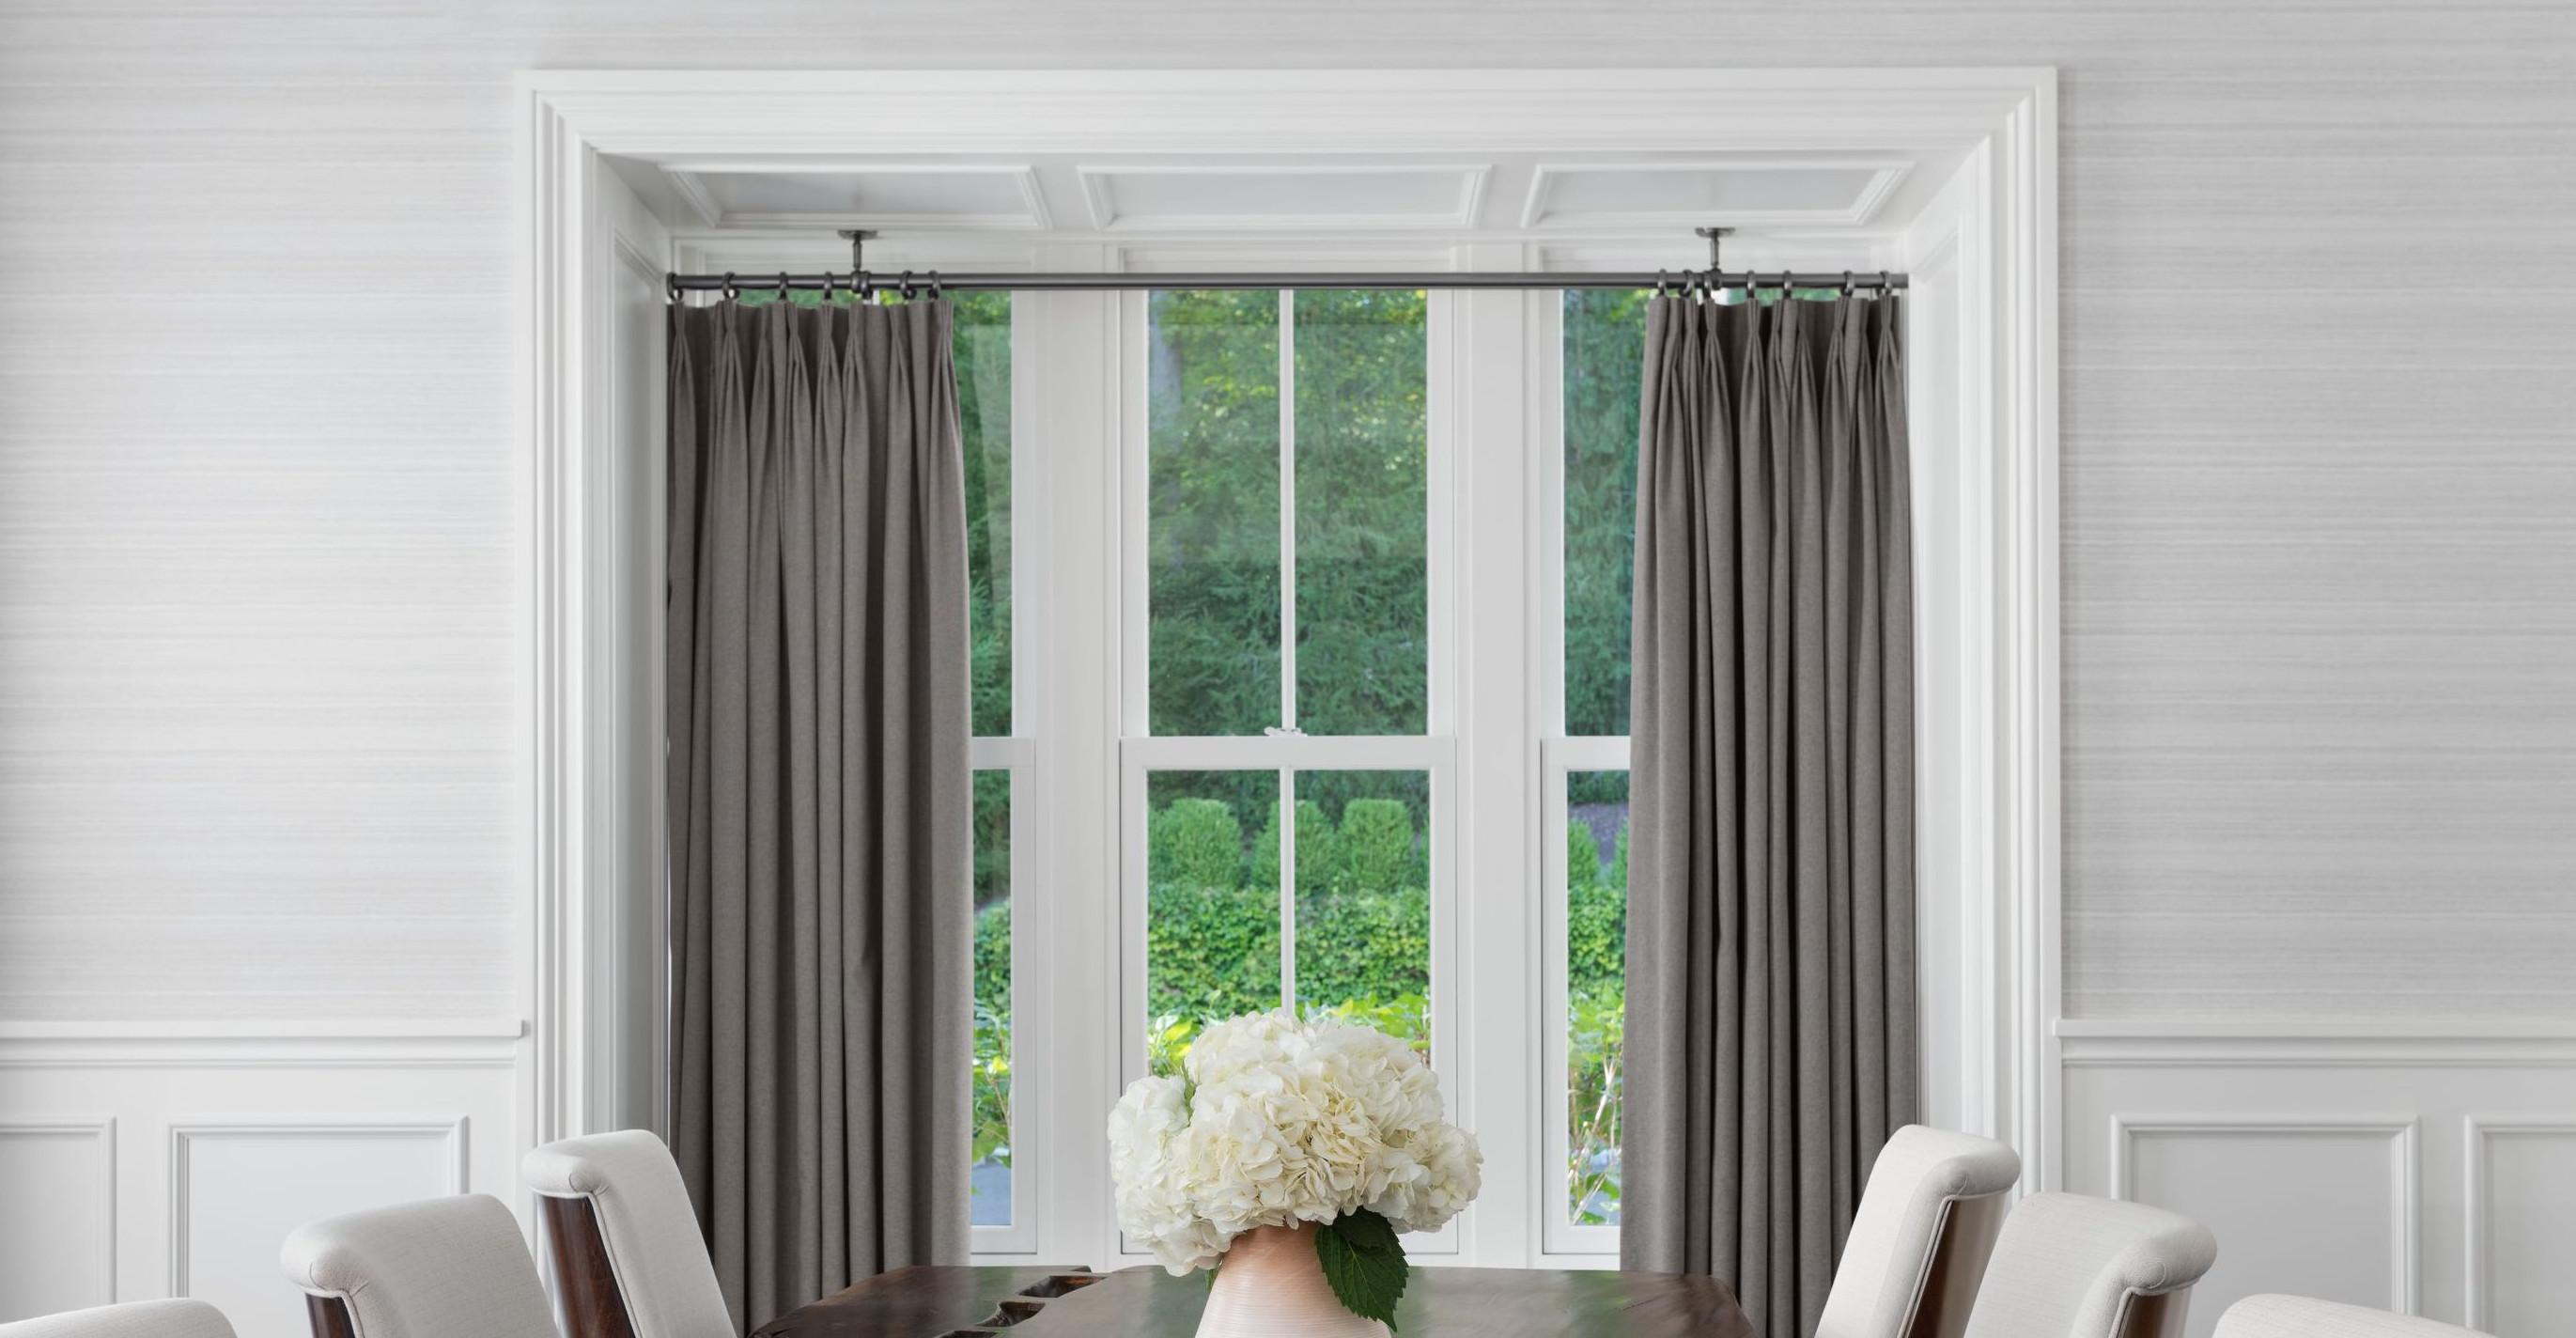 Drapes are hung from ceiling brackets in a window nook containing three side-by-side tall skinny windows.